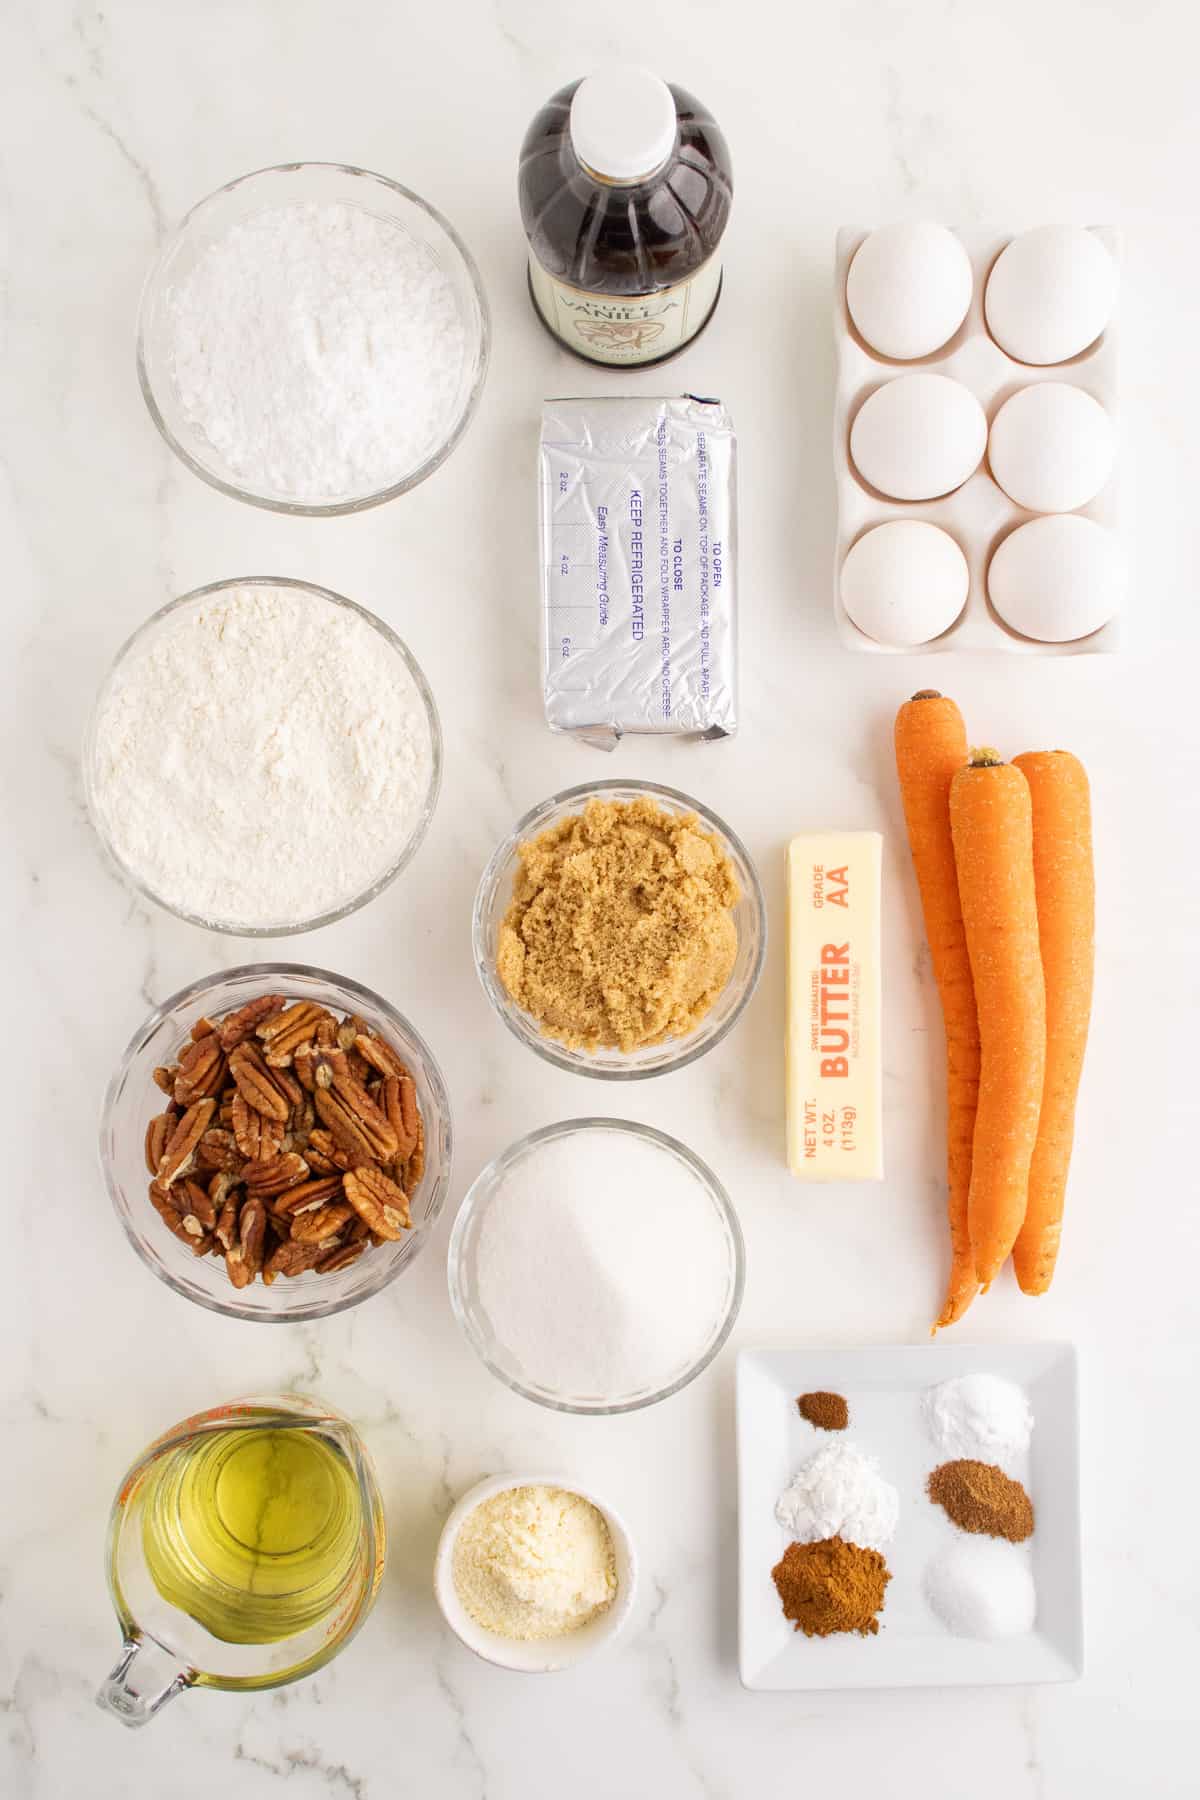 Ingredients needed to make a carrot cake recipe.